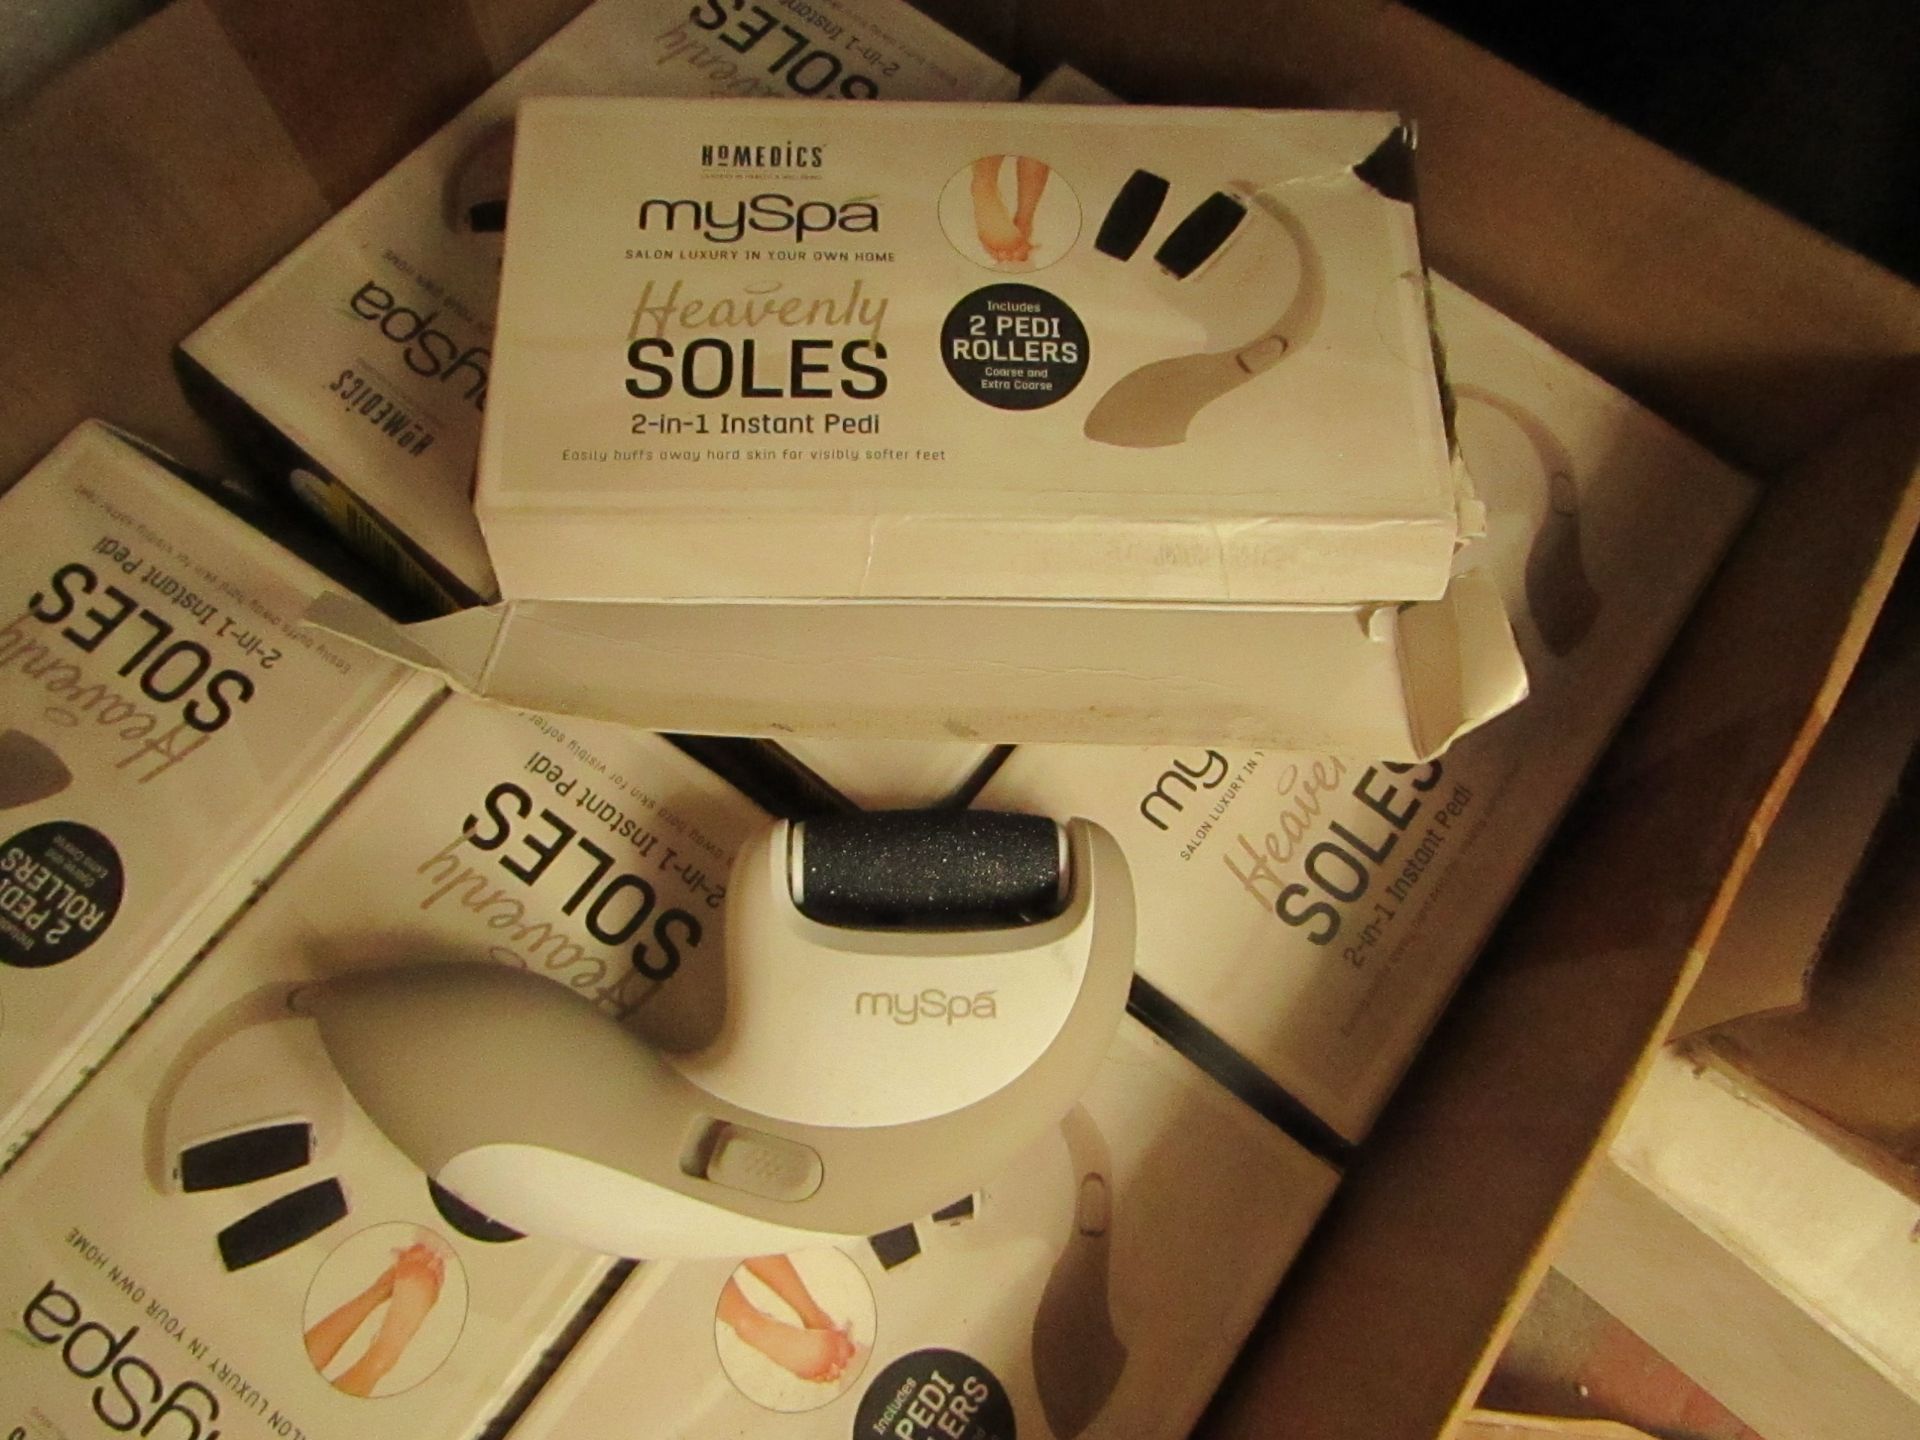 5x Homedics My Spa pedi rollers, new and boxed.